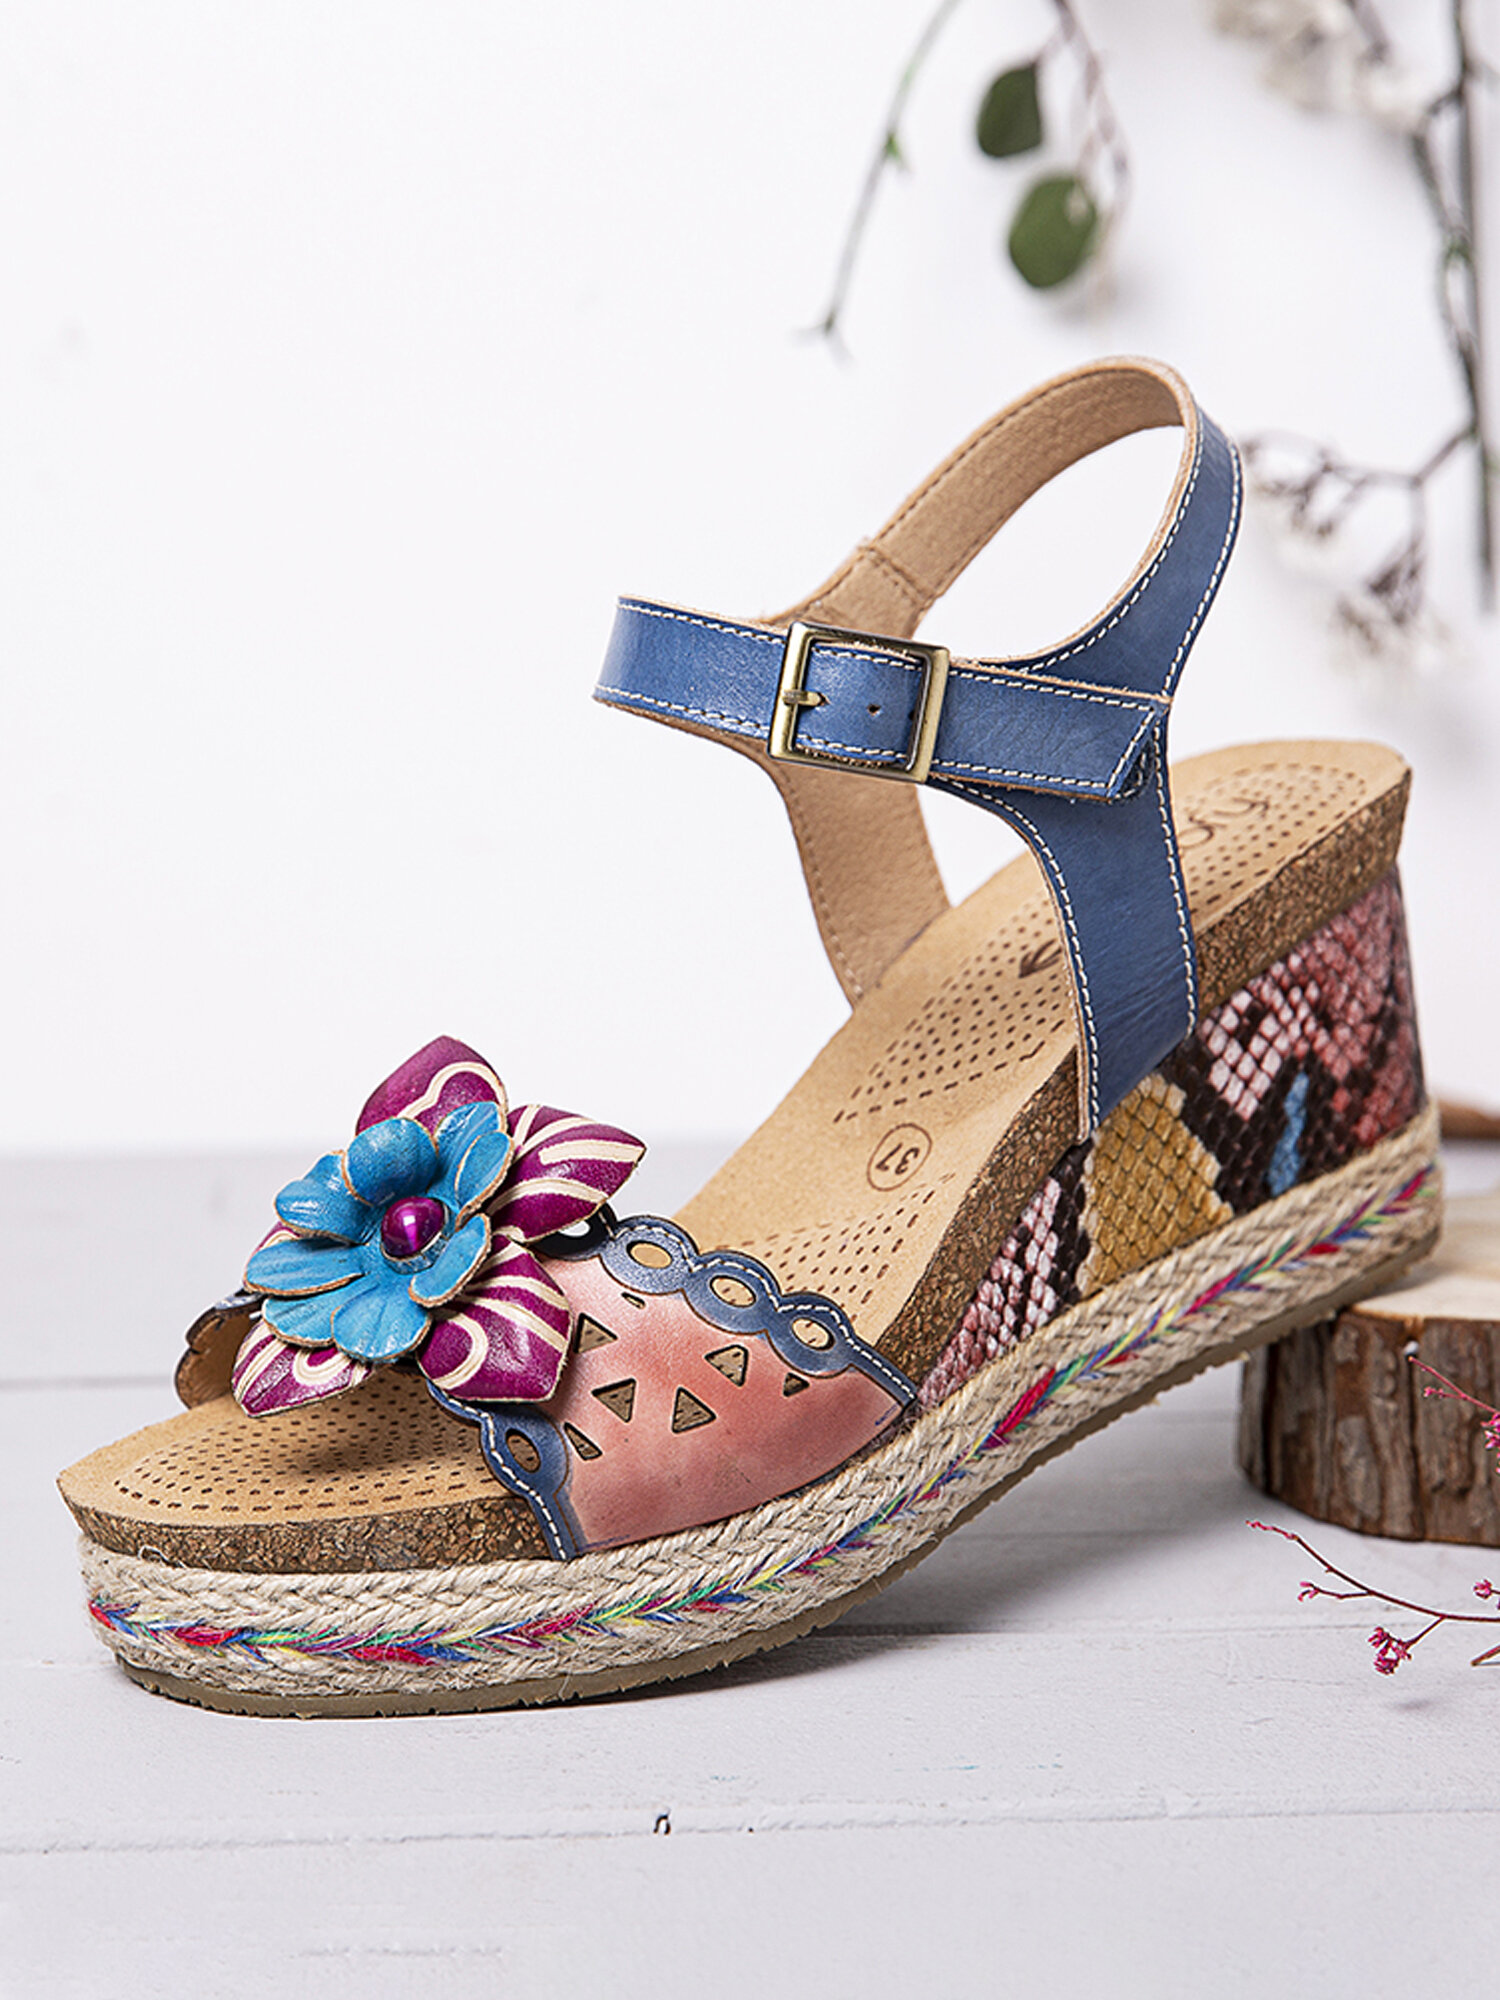 SOCOFY Leather Snakeskin Print Beaded Floral Cutouts Buckle Ankle Strap Wedge Sandals Espadrilles